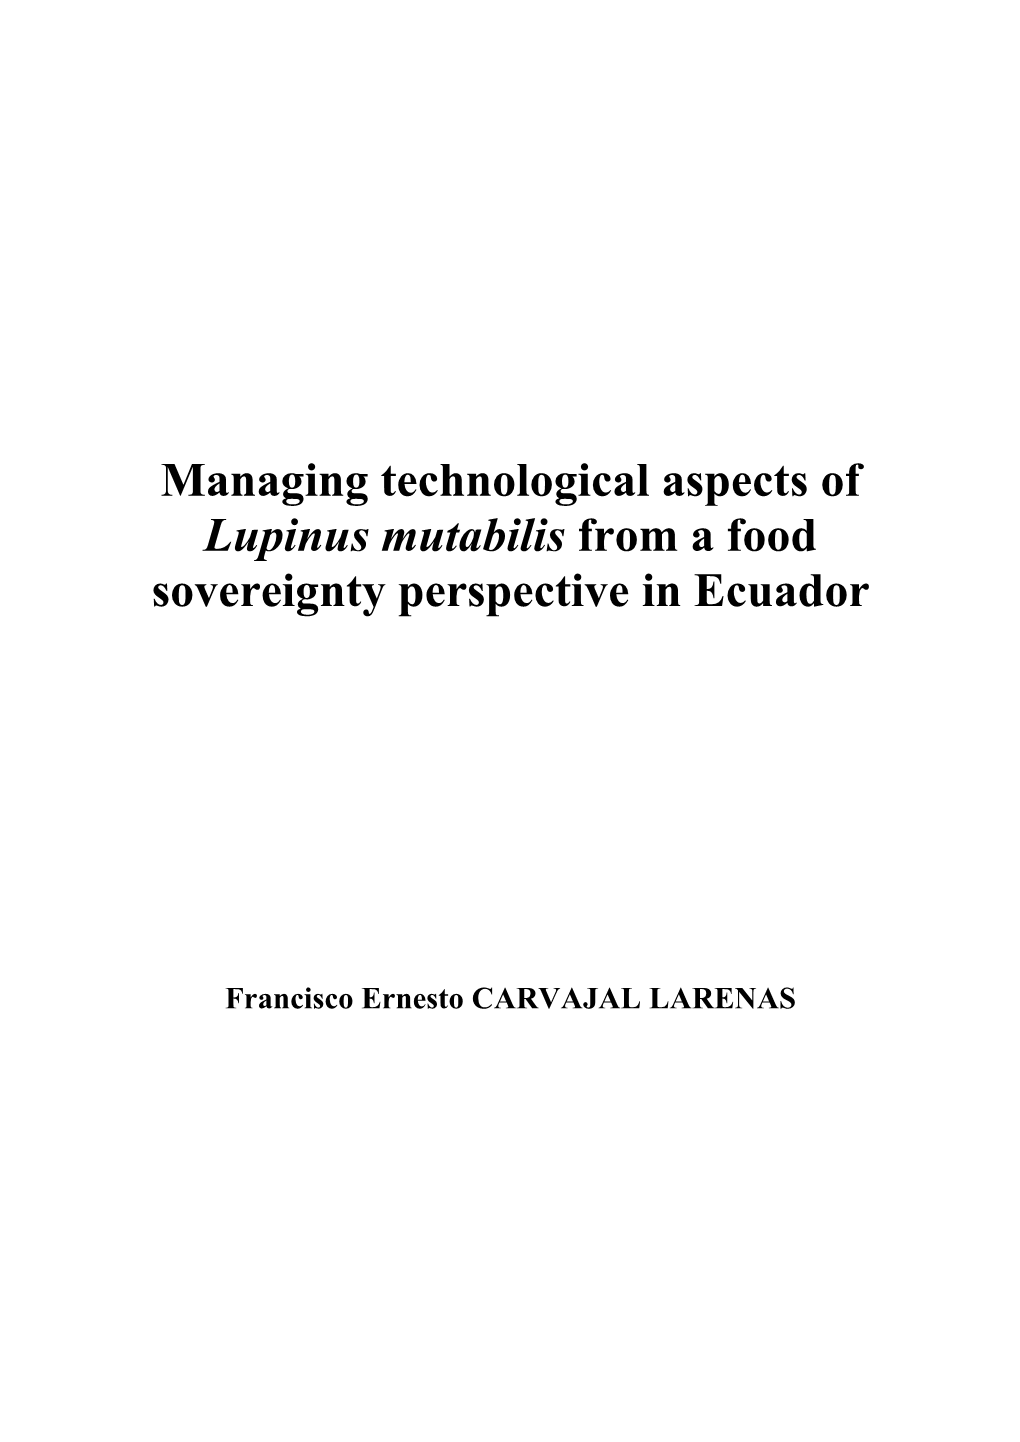 Managing Technological Aspects of Lupinus Mutabilis from a Food Sovereignty Perspective in Ecuador